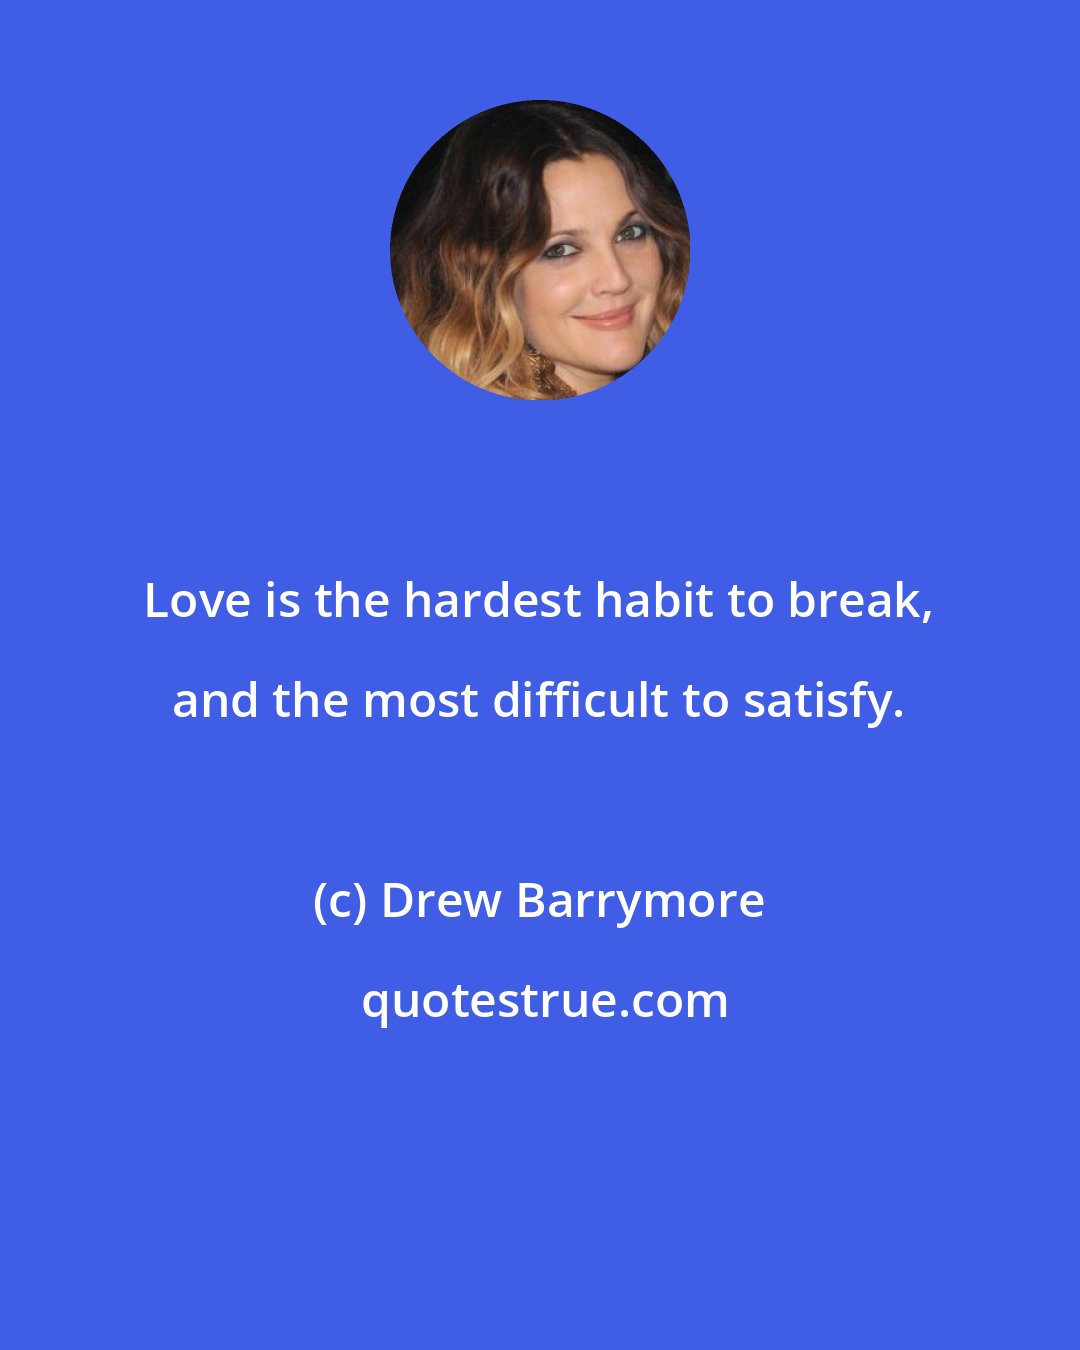 Drew Barrymore: Love is the hardest habit to break, and the most difficult to satisfy.